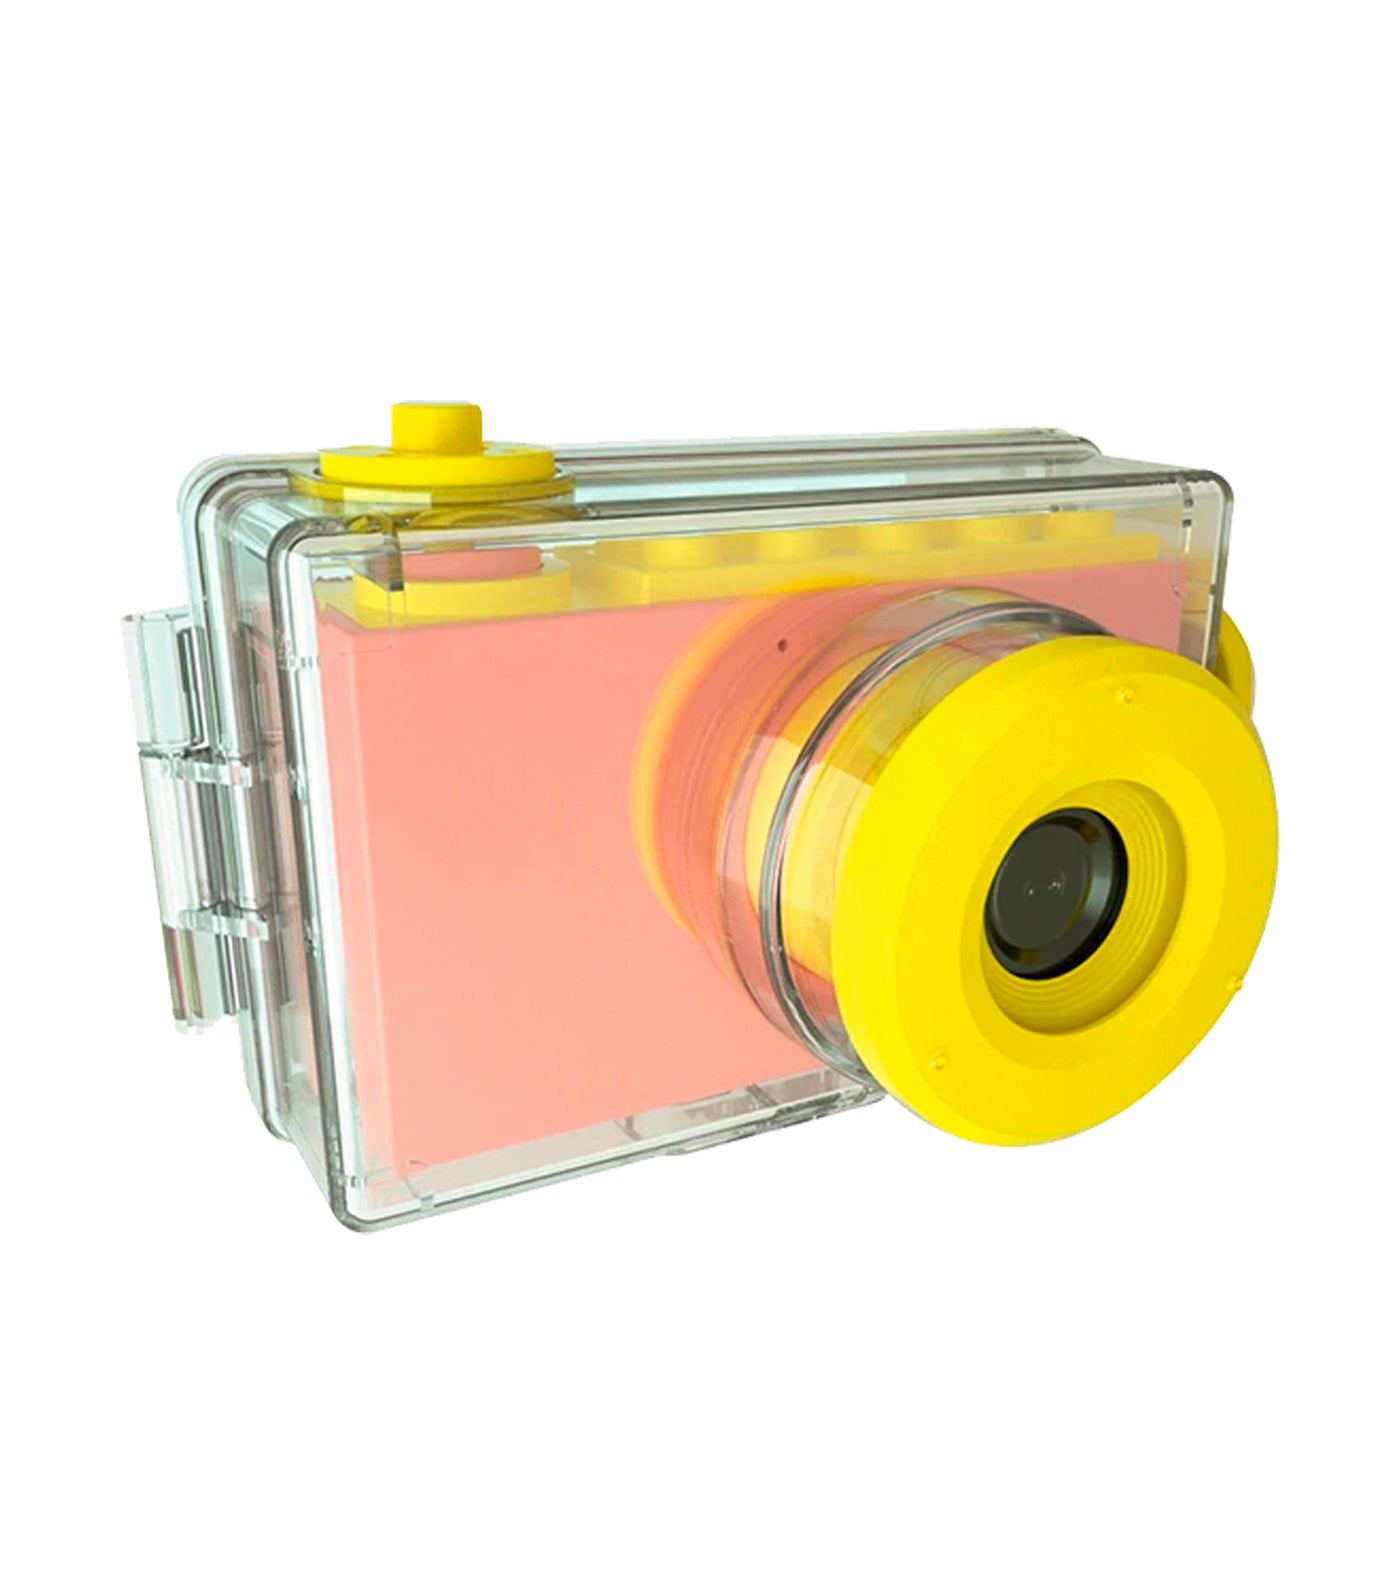 myfirst pink camera 2 - 8mp camera for kids with waterproof case 